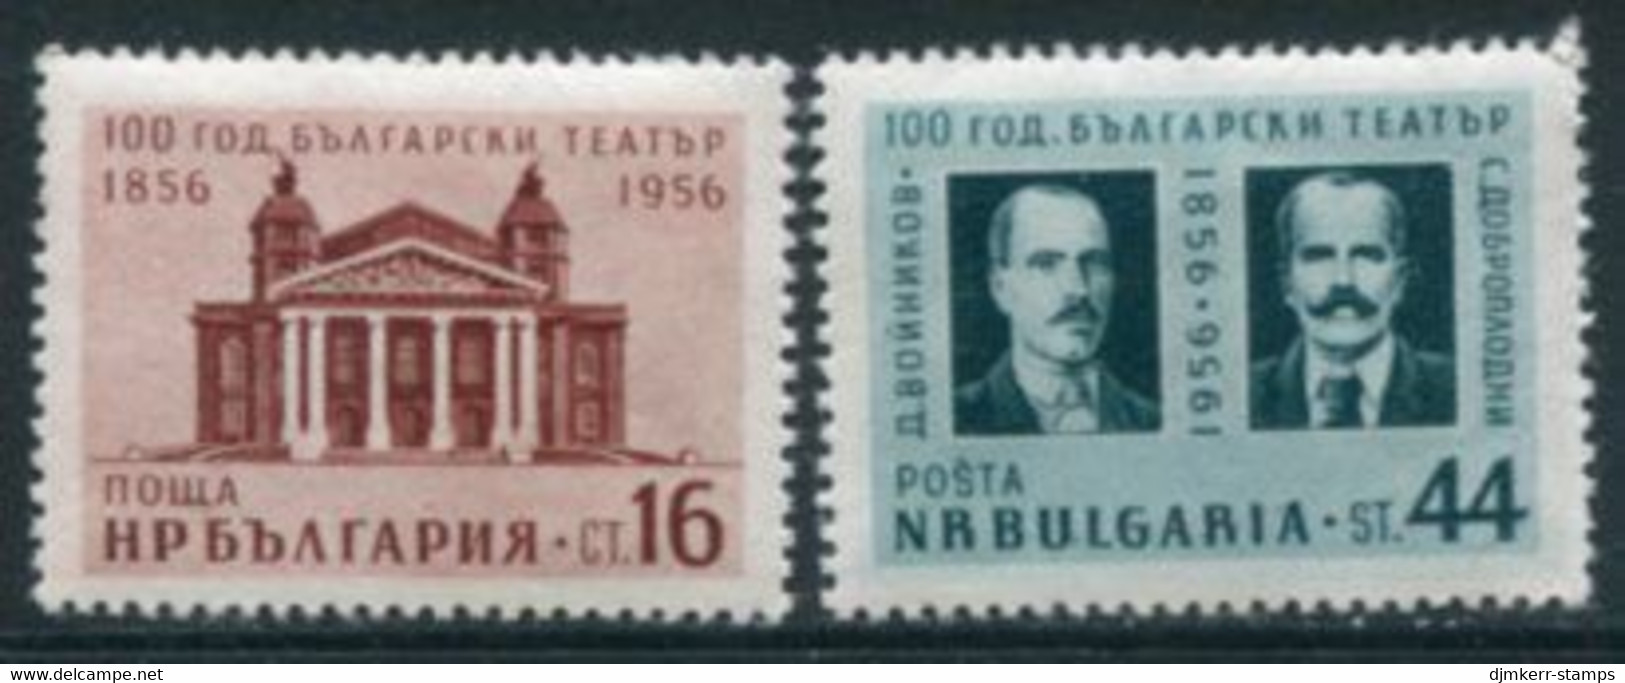 BULGARIA 1956 National Theatre MNH / **.  Michel 1005-06 - Unused Stamps